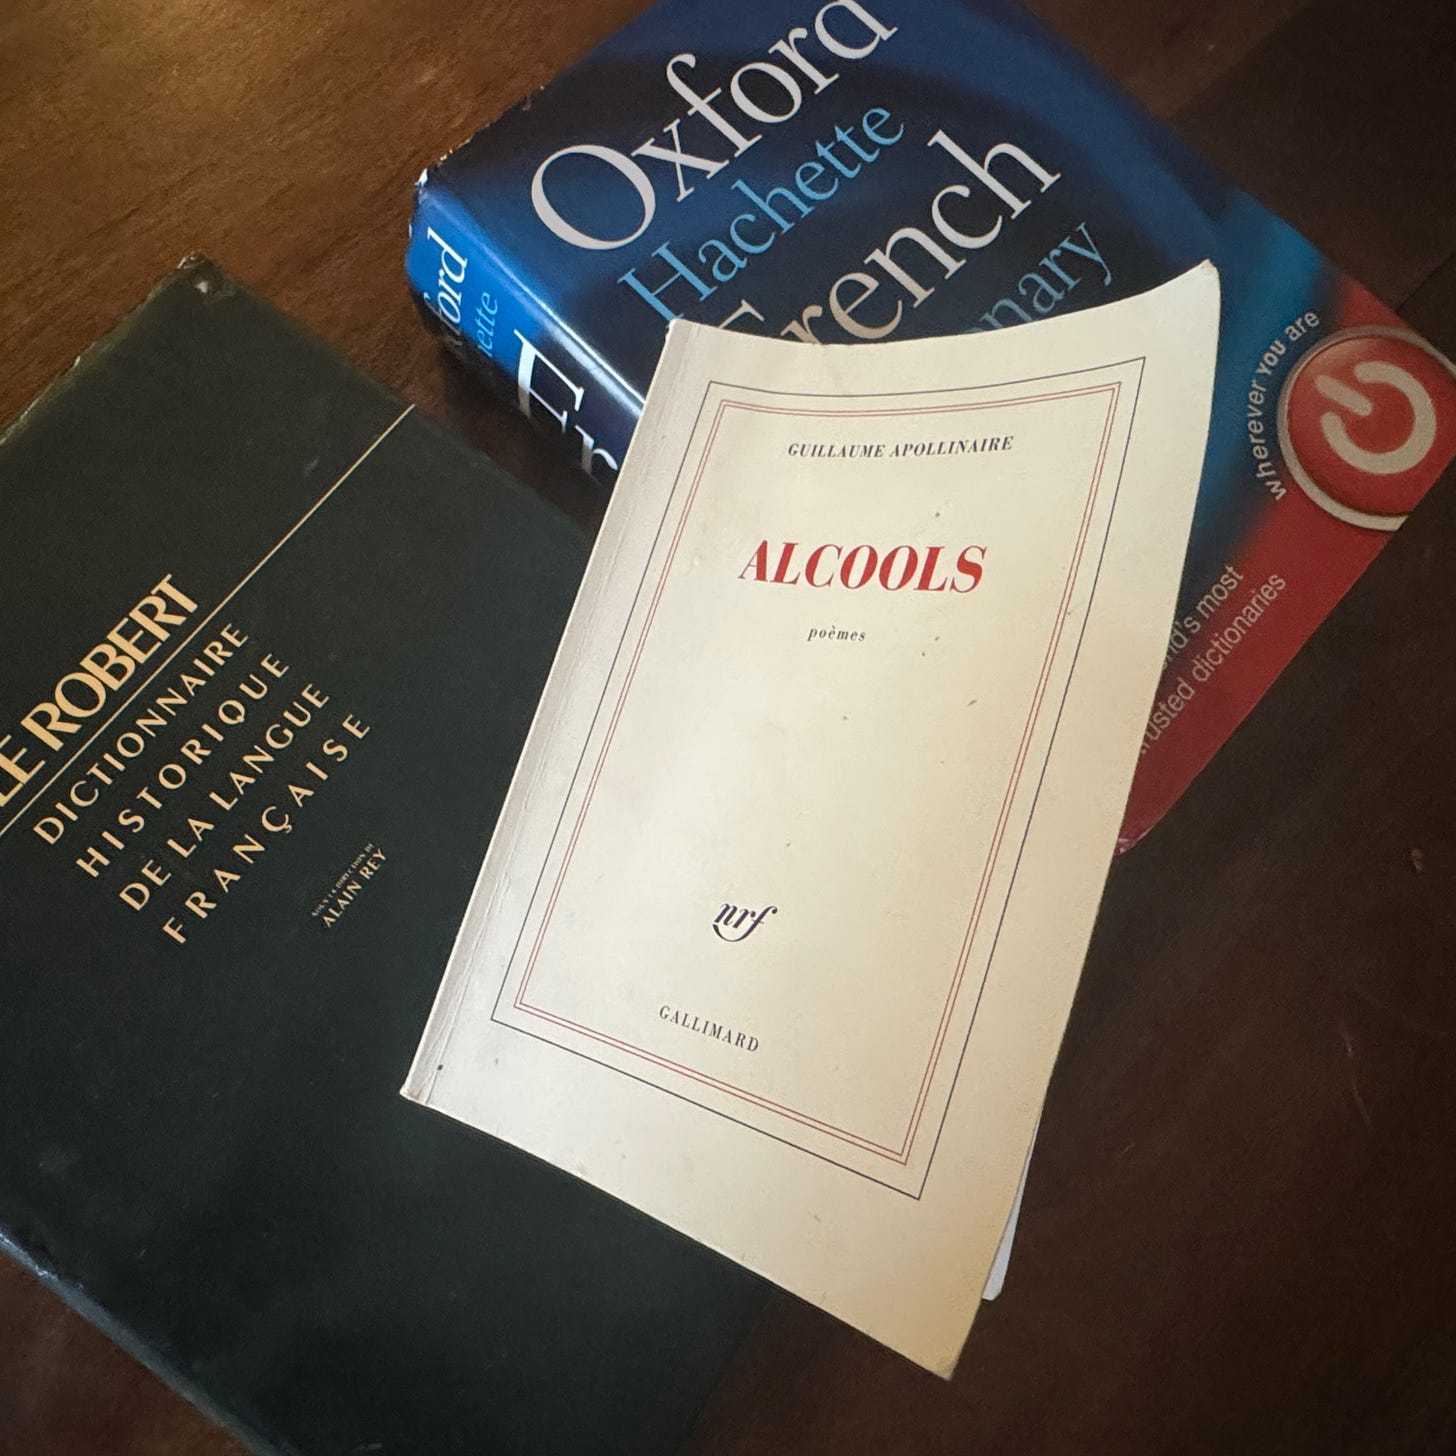 A copy of Gallimard's edition of Guillaume Apollinaire's Alcools, on top of a French-English dictionary and a historical dictionary of French